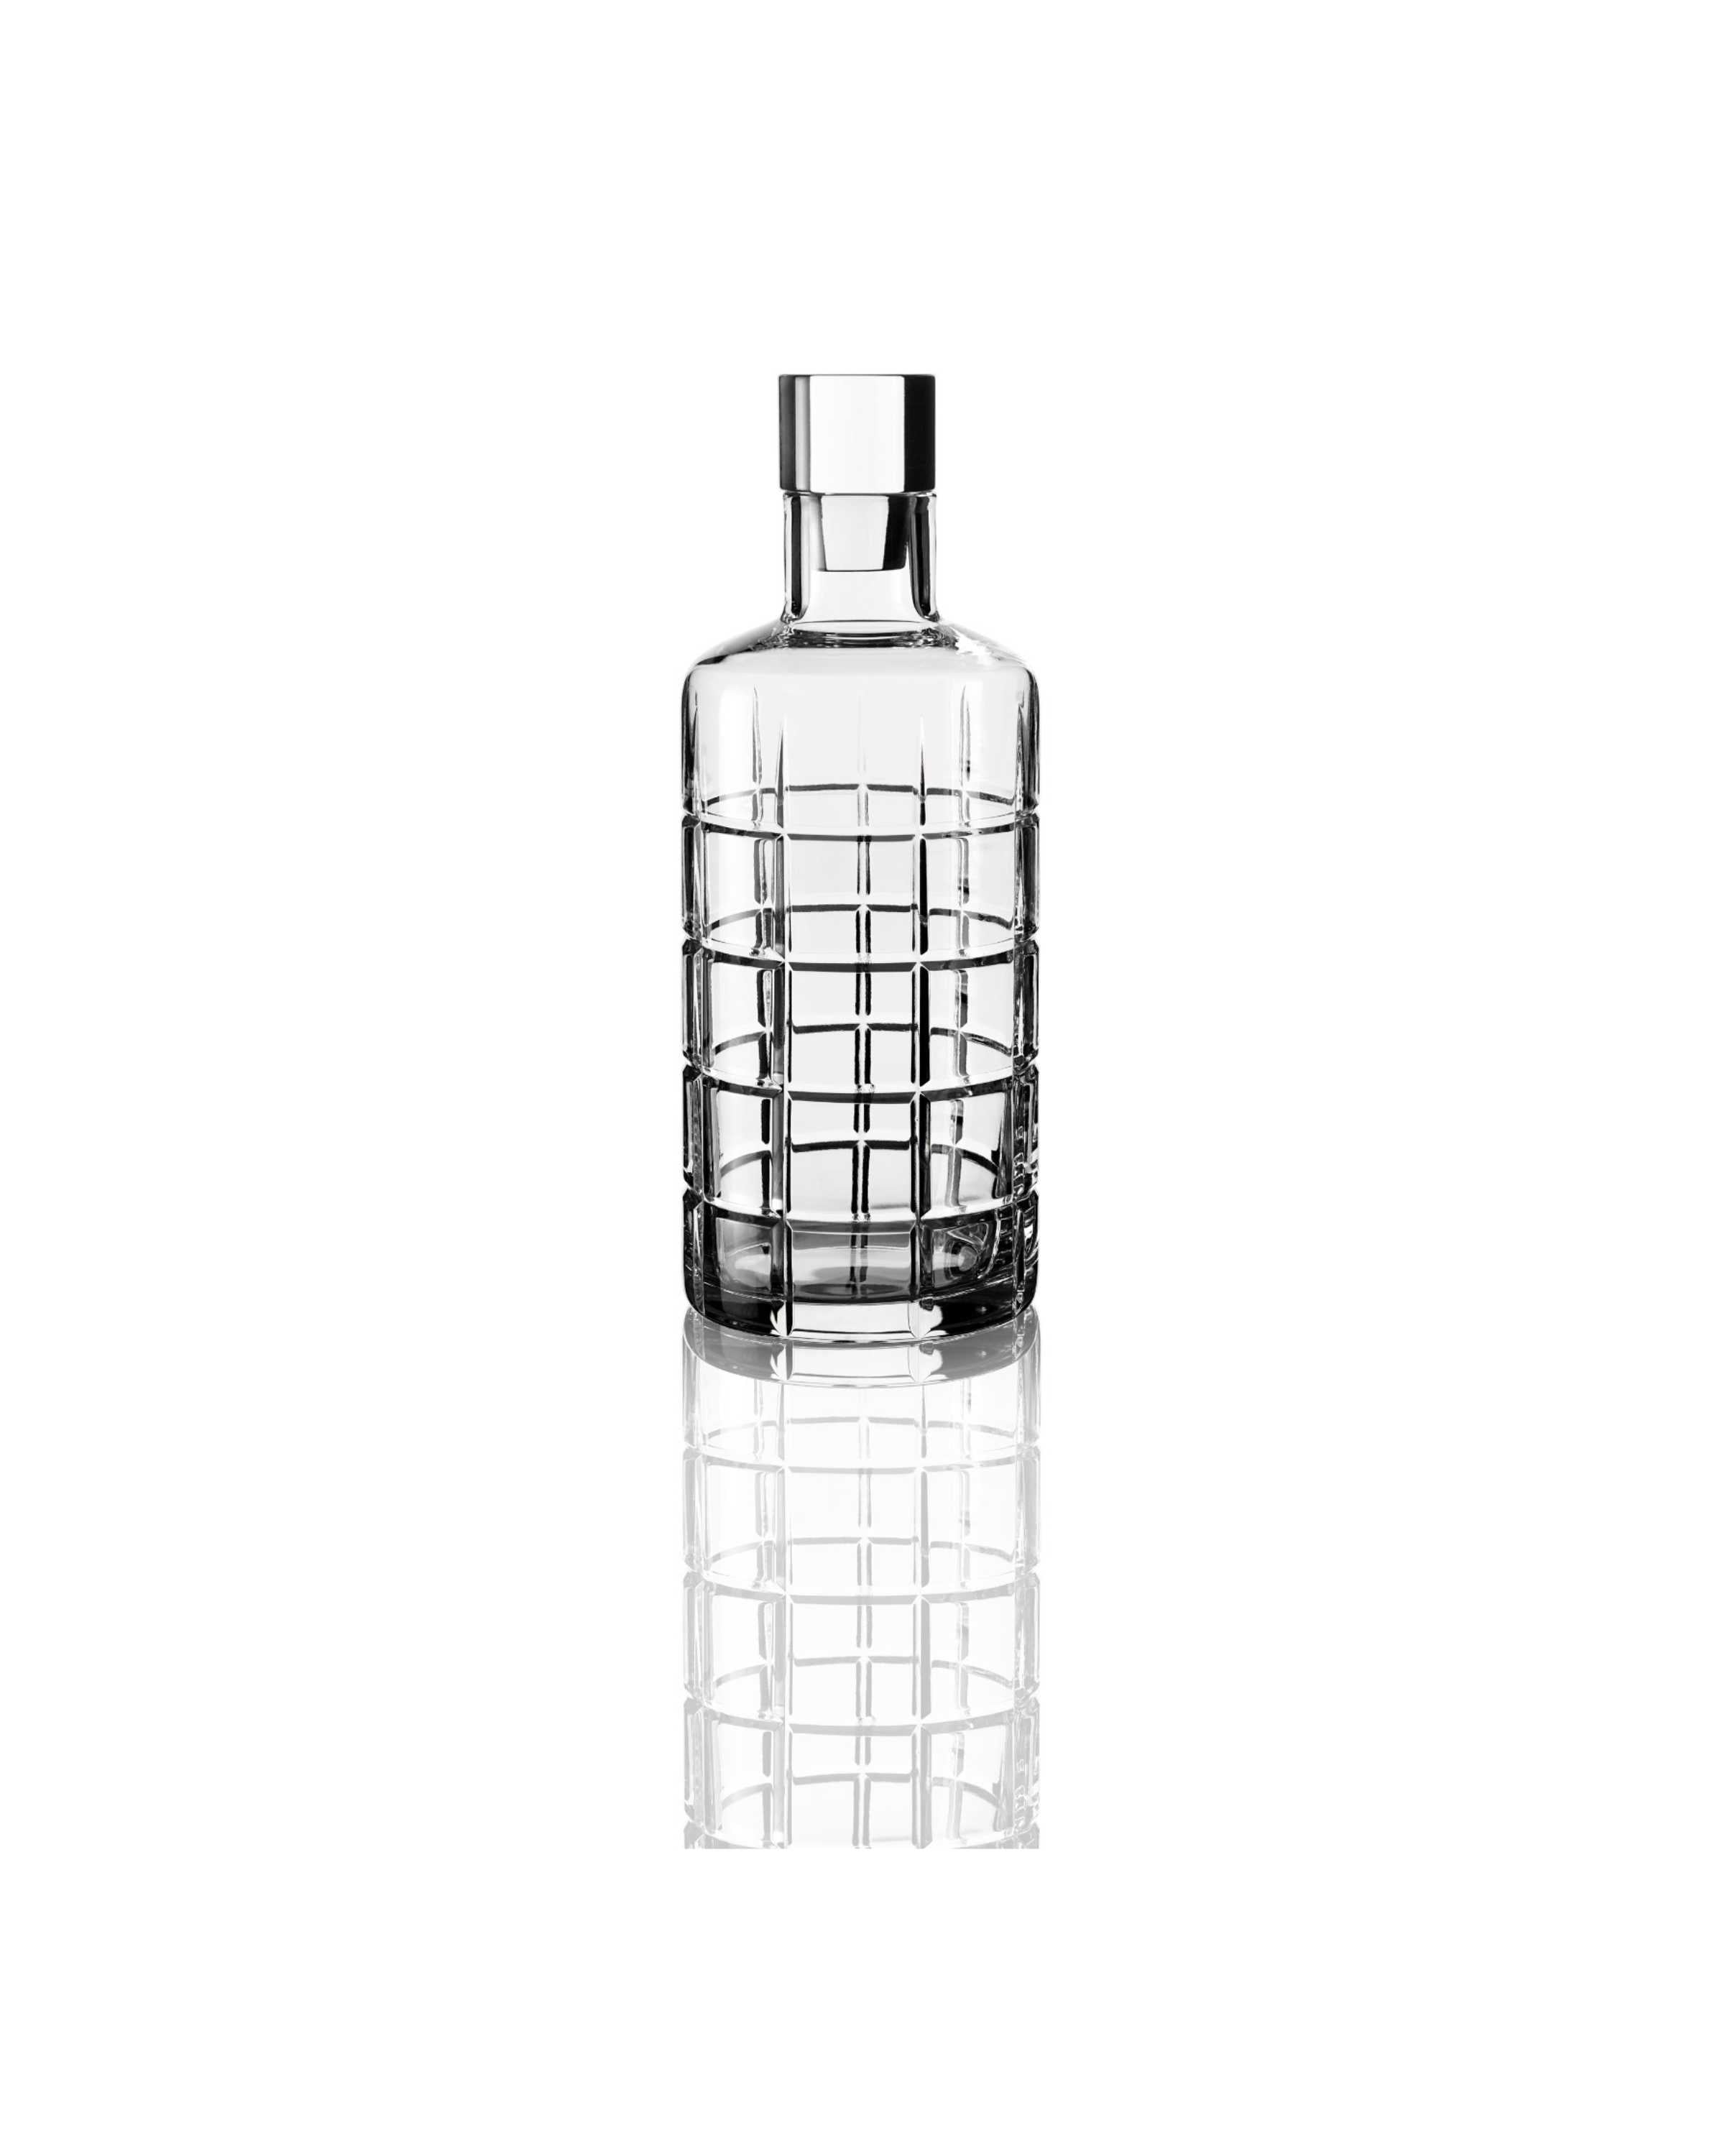 Cylindrical Luxury Crystal Decanter